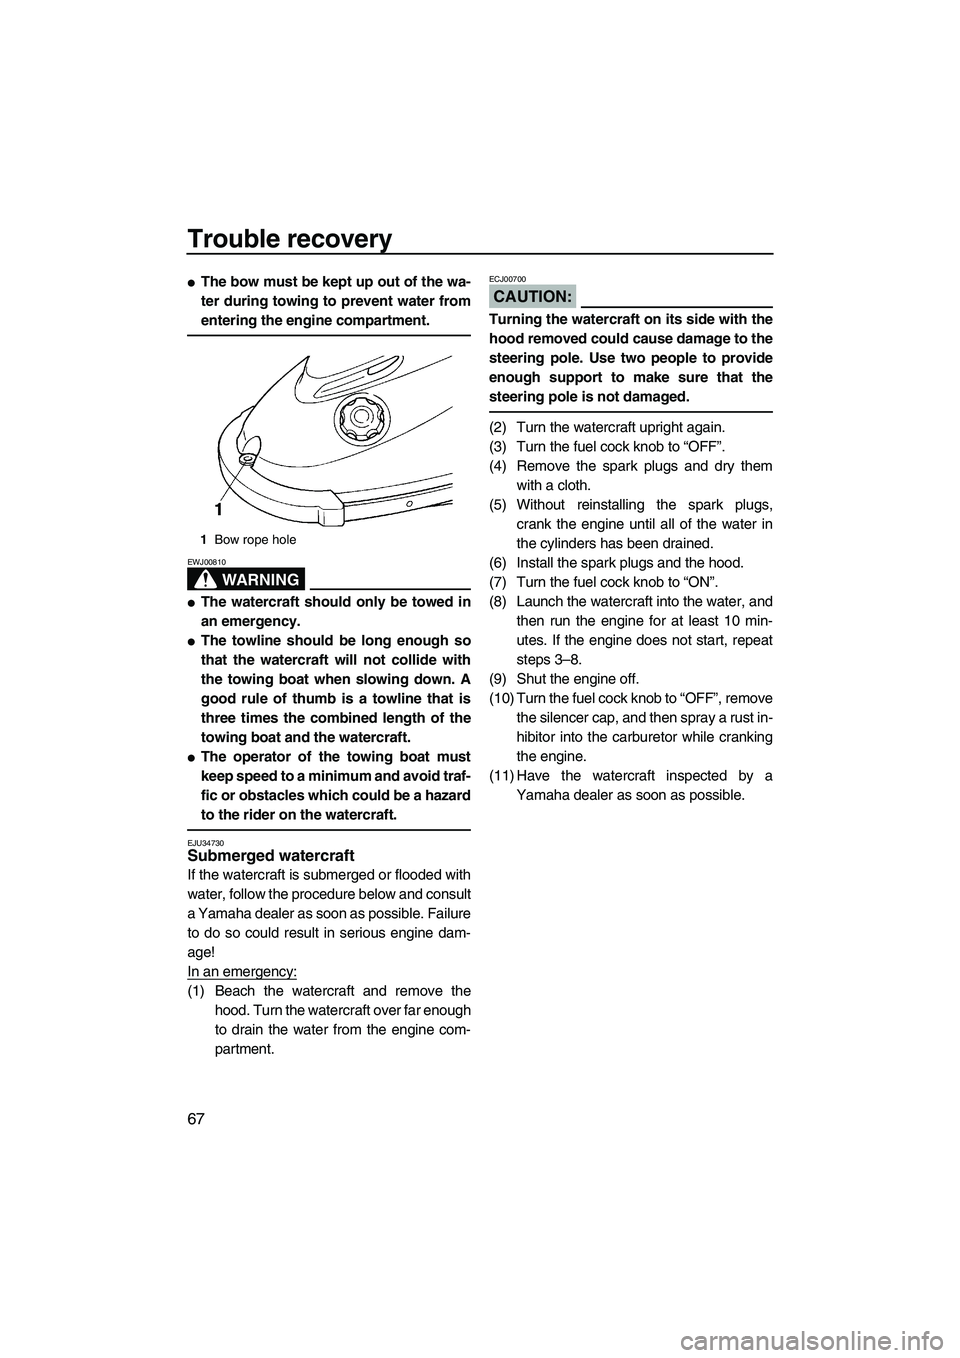 YAMAHA SUPERJET 2007  Owners Manual Trouble recovery
67
The bow must be kept up out of the wa-
ter during towing to prevent water from
entering the engine compartment.
WARNING
EWJ00810
The watercraft should only be towed in
an emergen